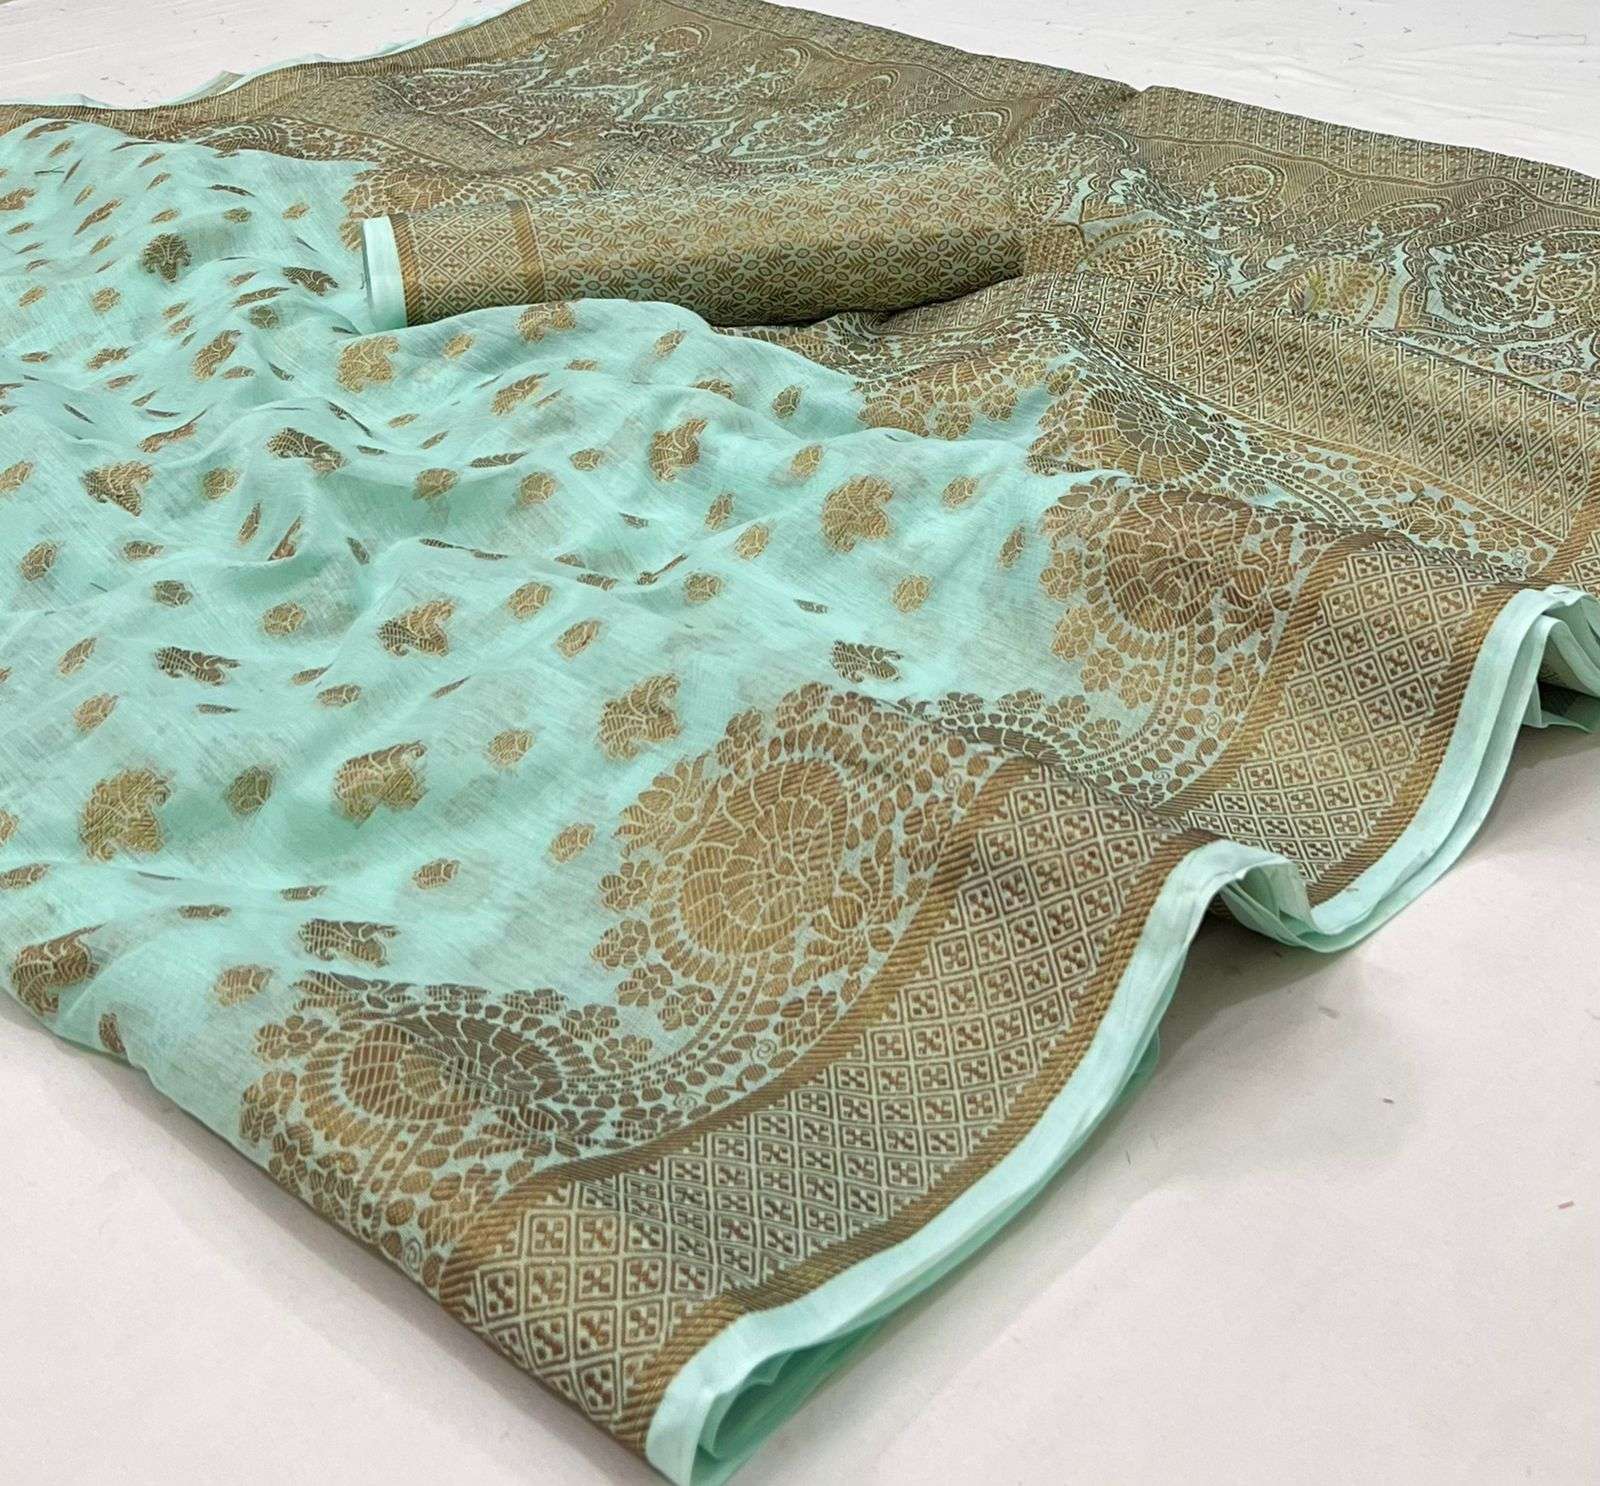 Cotton silk with Weaving Design Saree collection at wholesal...